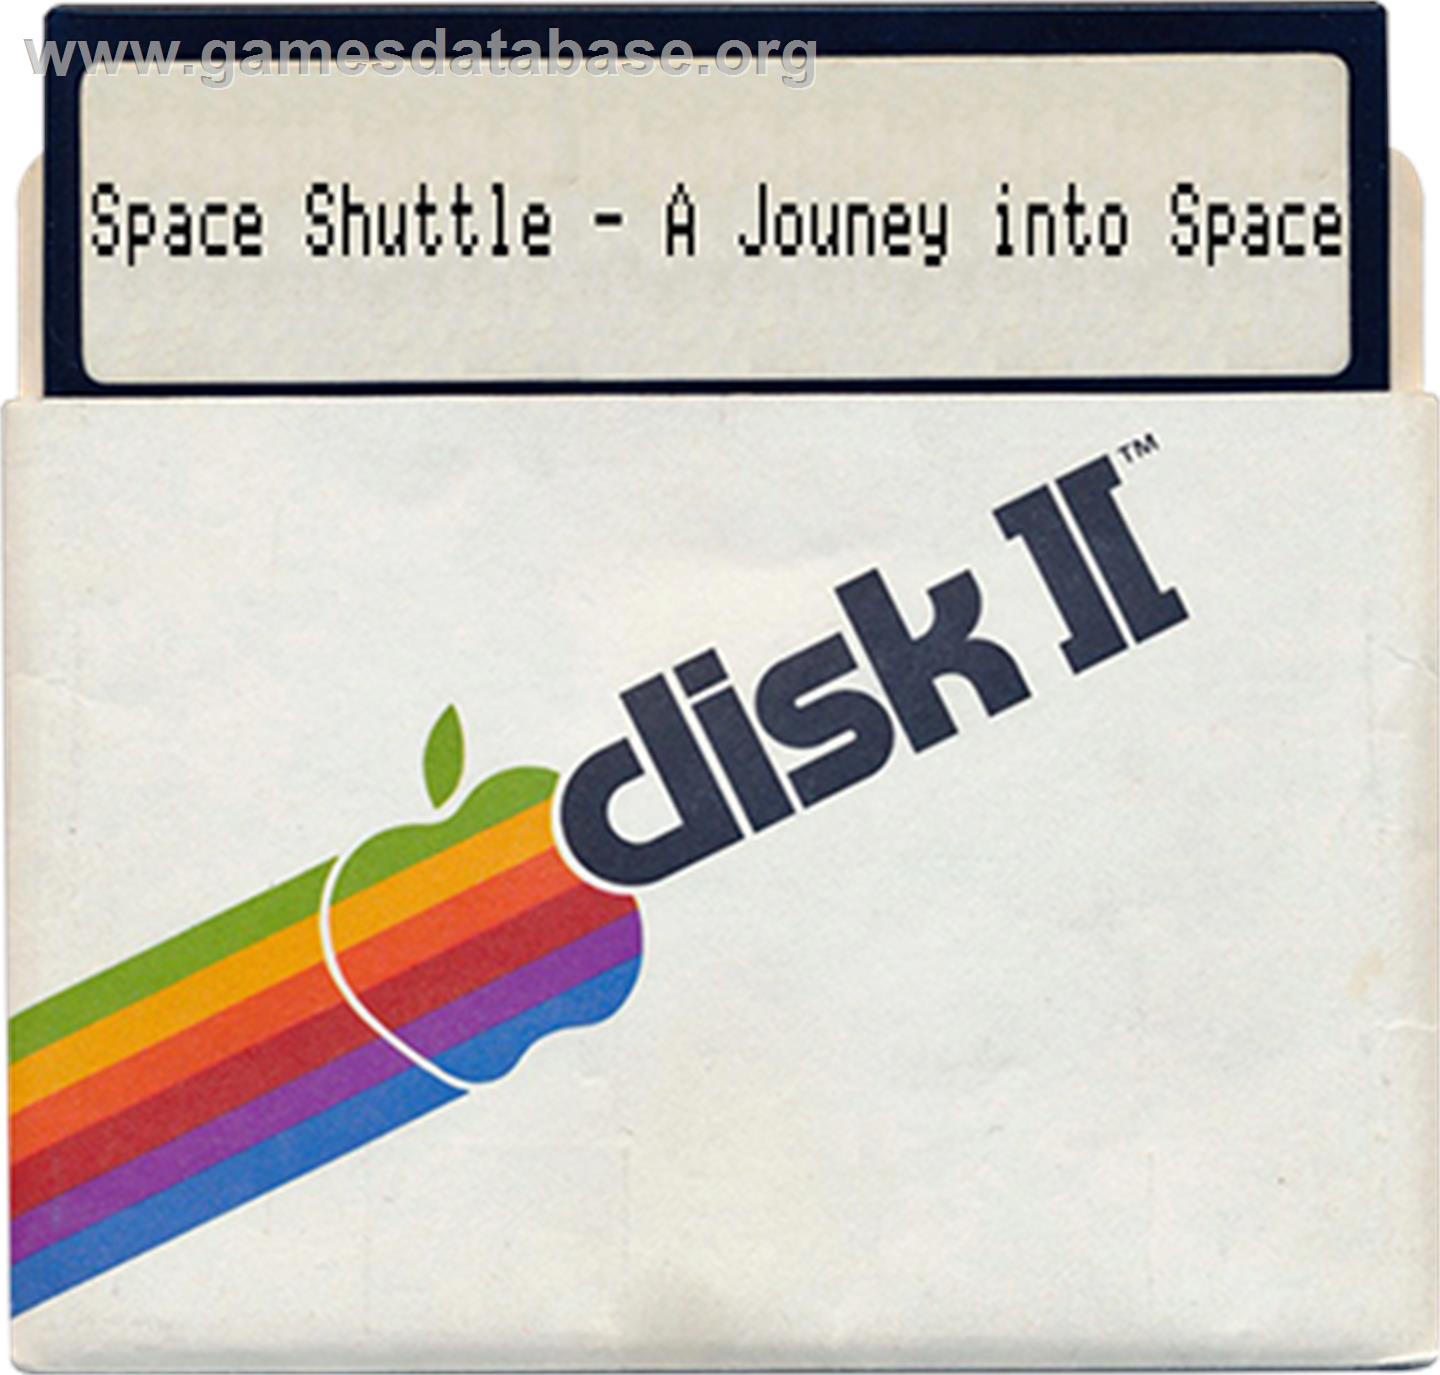 Space Shuttle: A Journey into Space - Apple II - Artwork - Disc